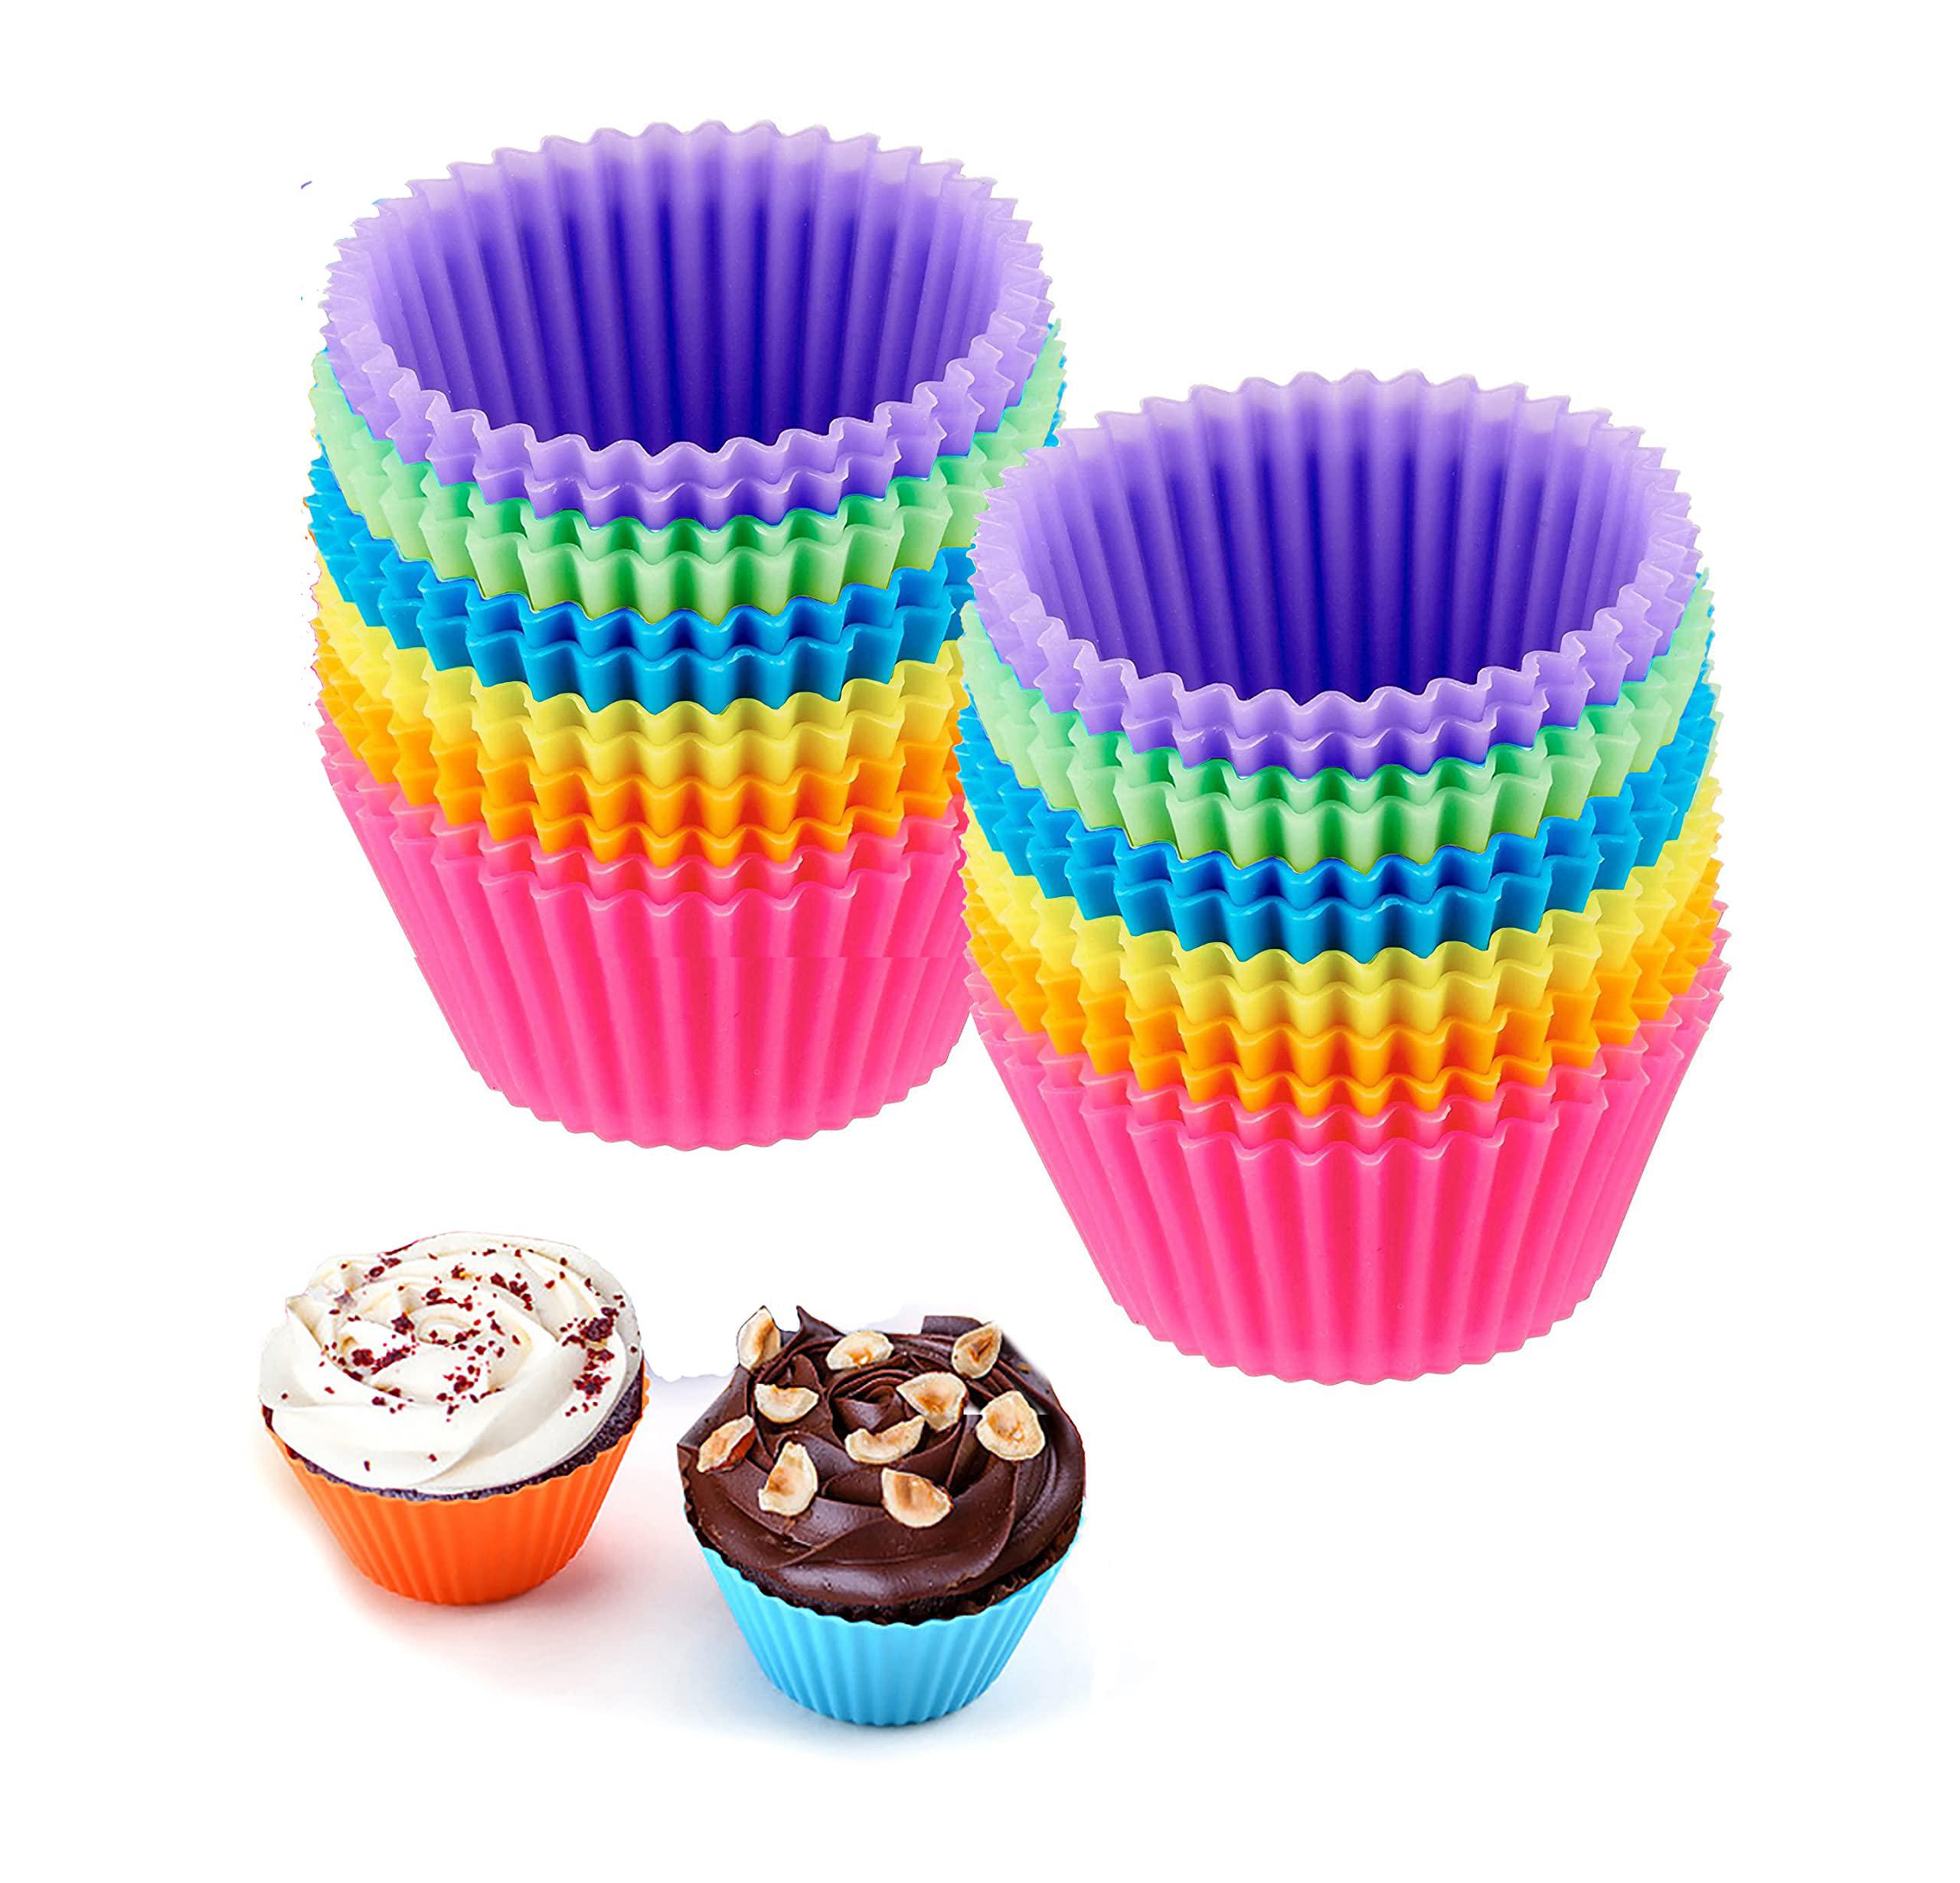 JEWOSTER reusable silicone cupcake baking cups 24 pack, 2.75 inch cups, & non-stick muffin liners for party halloween christmas,6 rain